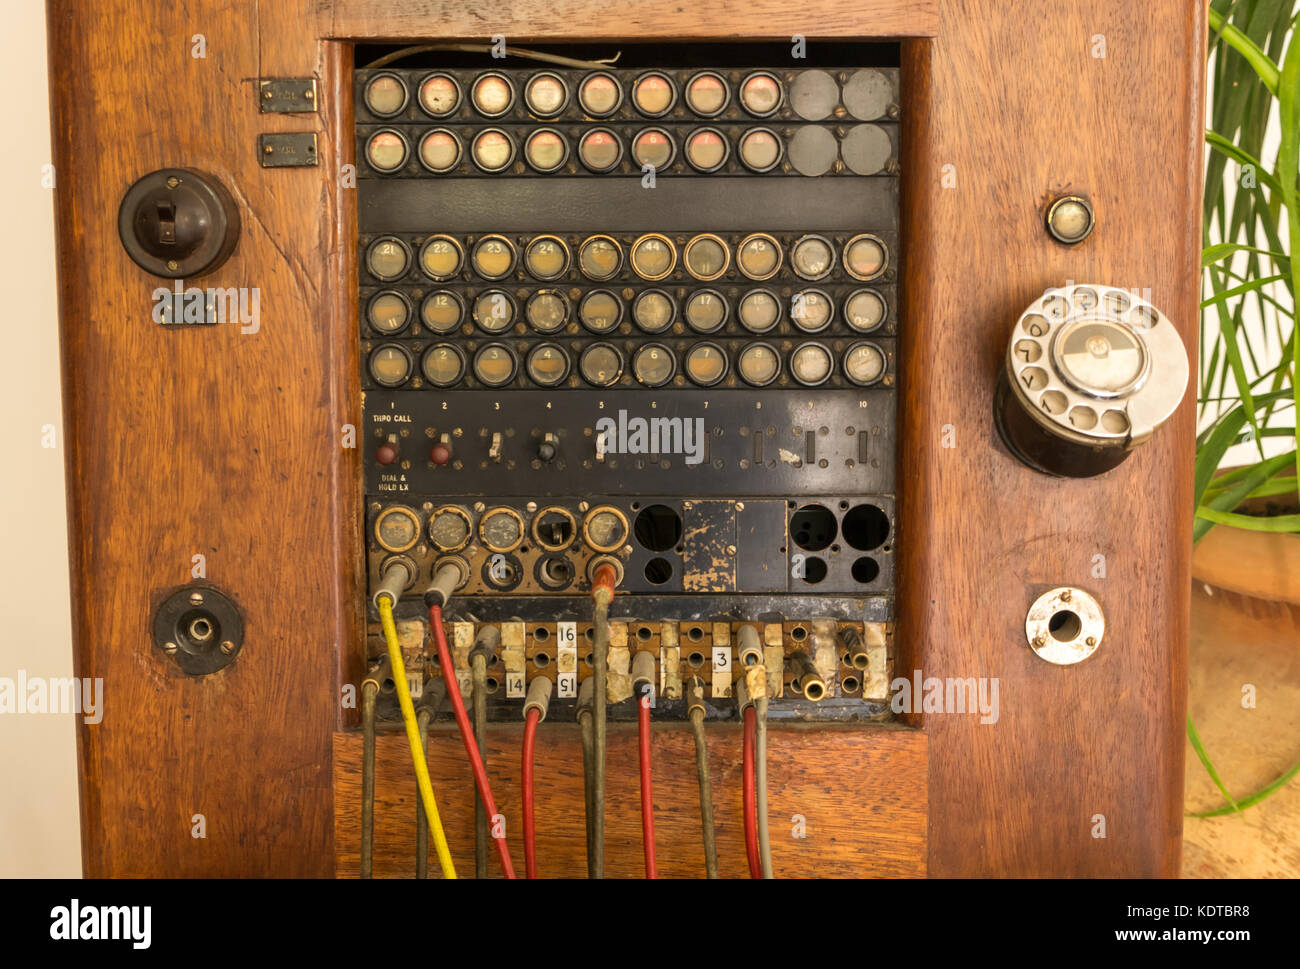 Old fashioned telephone exchange switchboard in hotel foyer, Amman, Jordan, Middle East Stock Photo